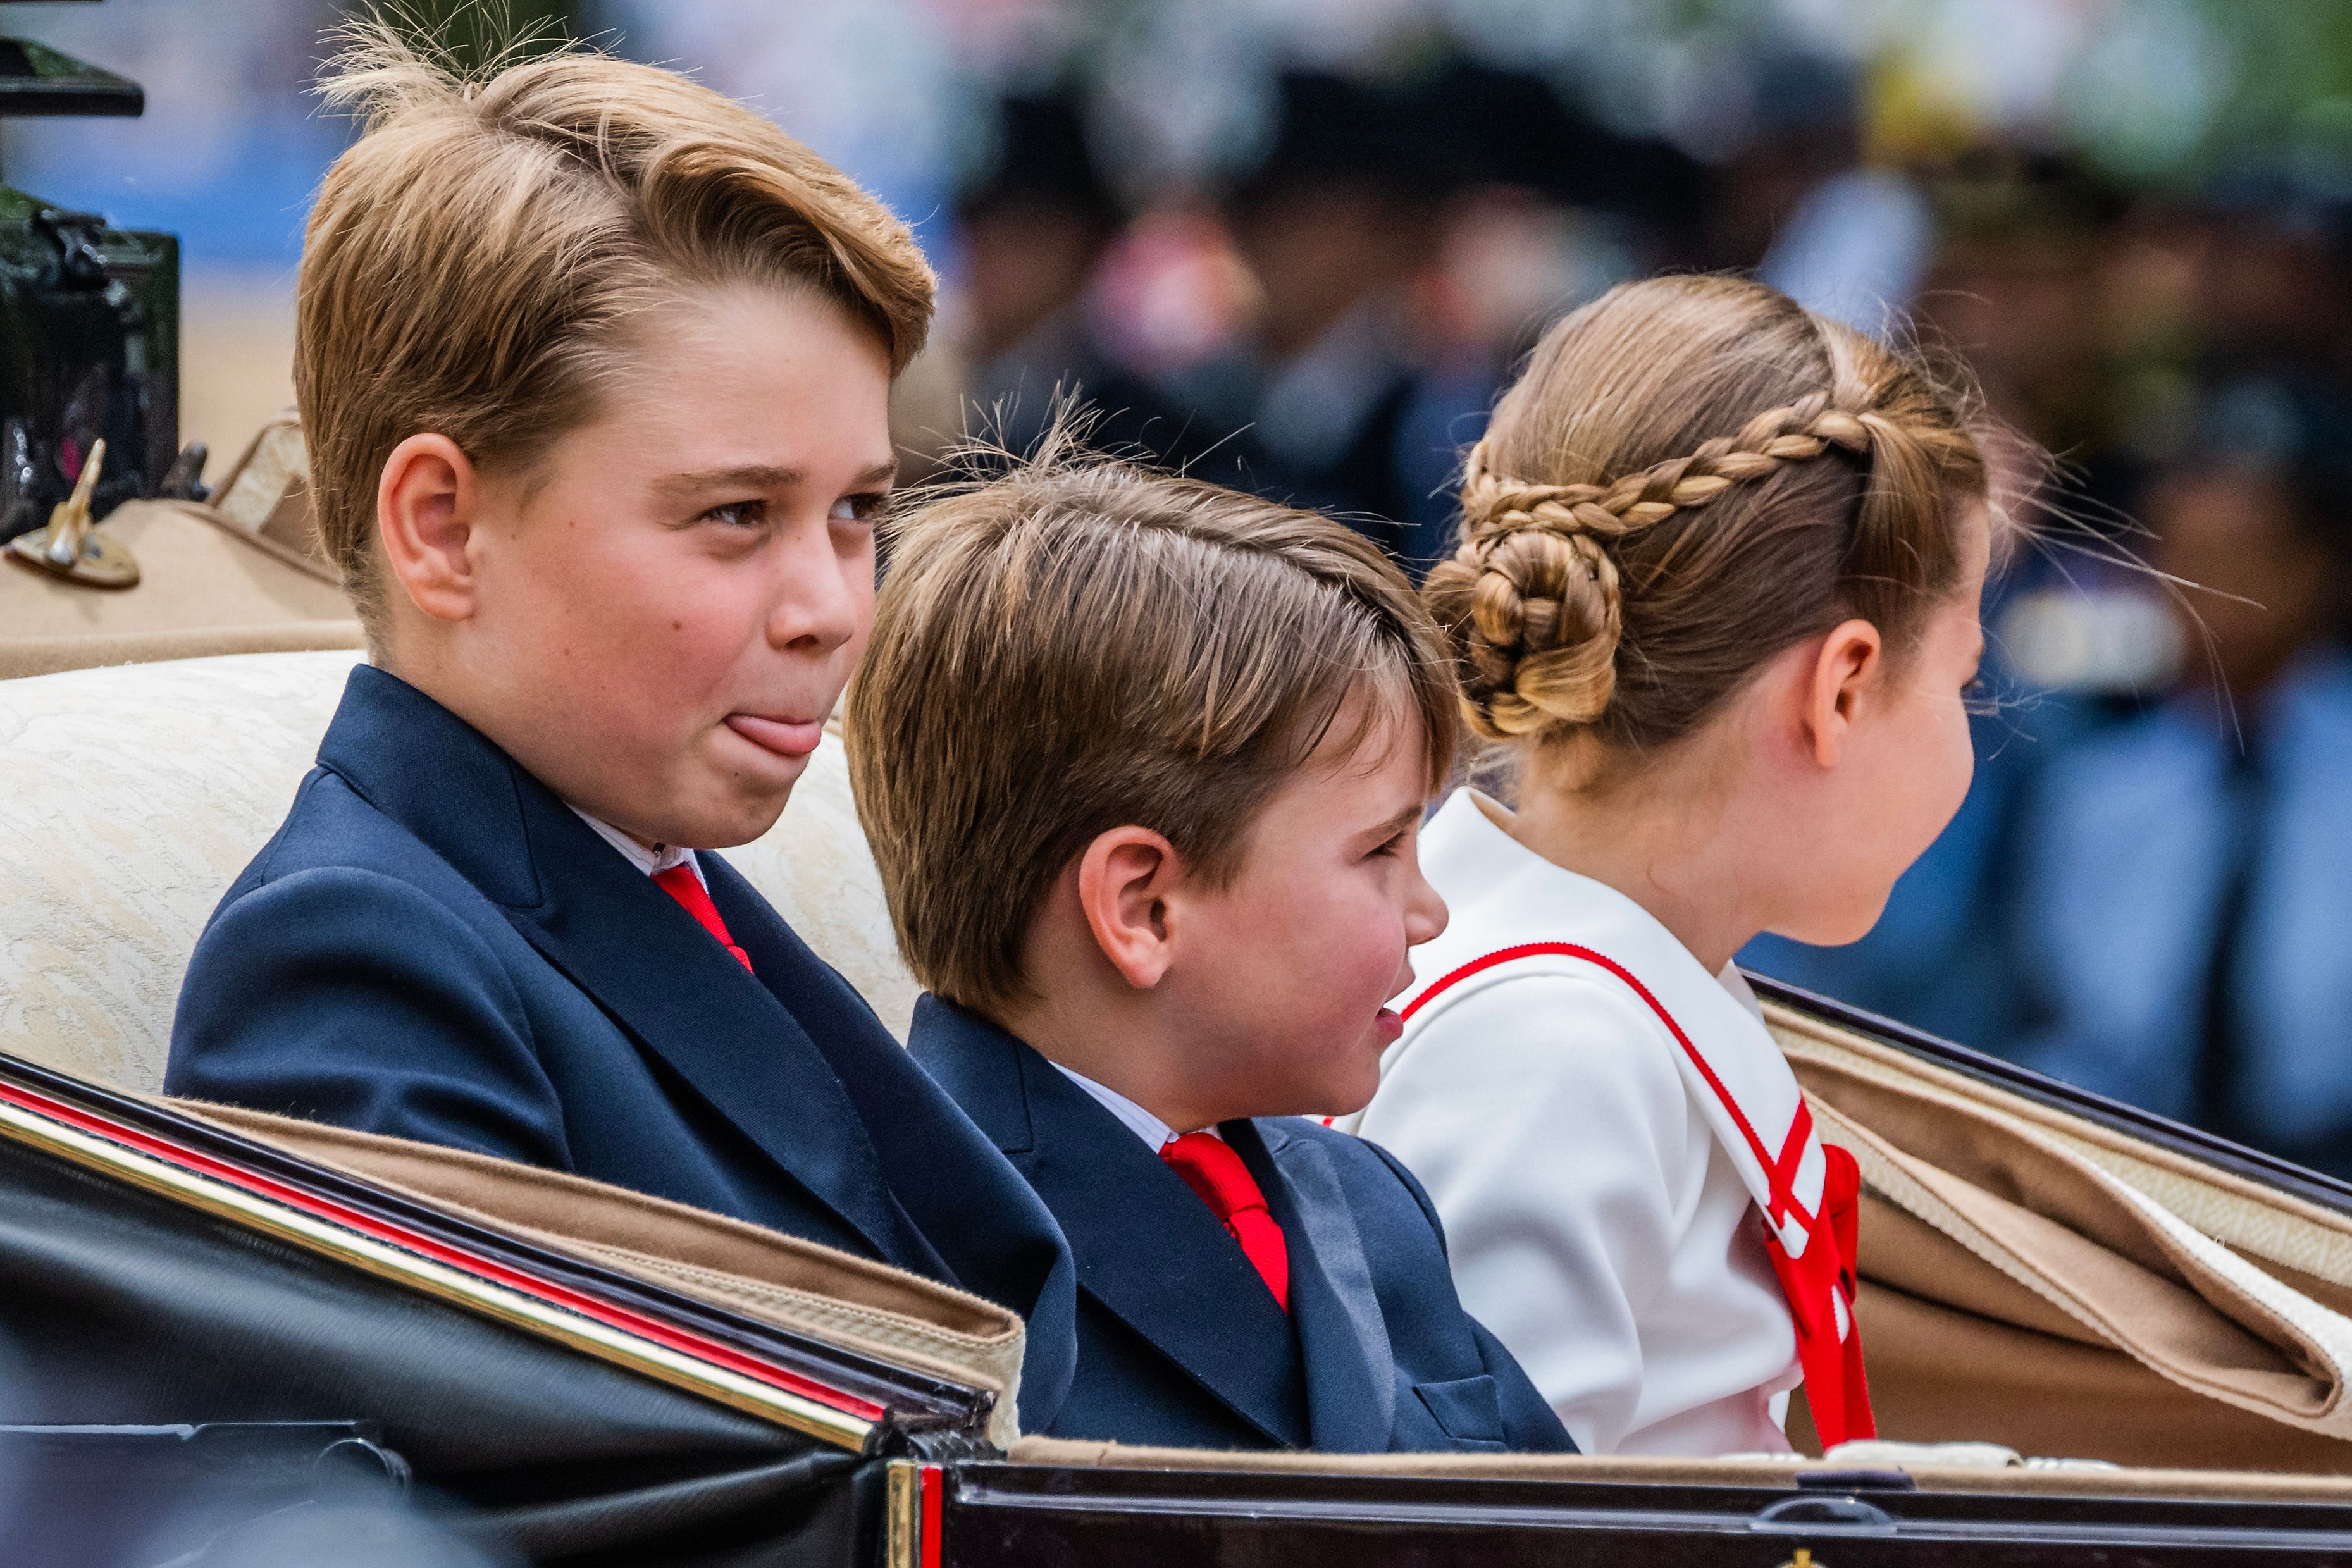 <p>Prince George stuck out his tongue while riding in a carriage with Prince Louis and Princess Charlotte during <a href="https://www.wonderwall.com/celebrity/royals/trooping-the-colour-2023-king-charles-iii-celebrates-the-first-of-his-reign-752078.gallery">Trooping the Colour</a> in London on June 17, 2023. </p>